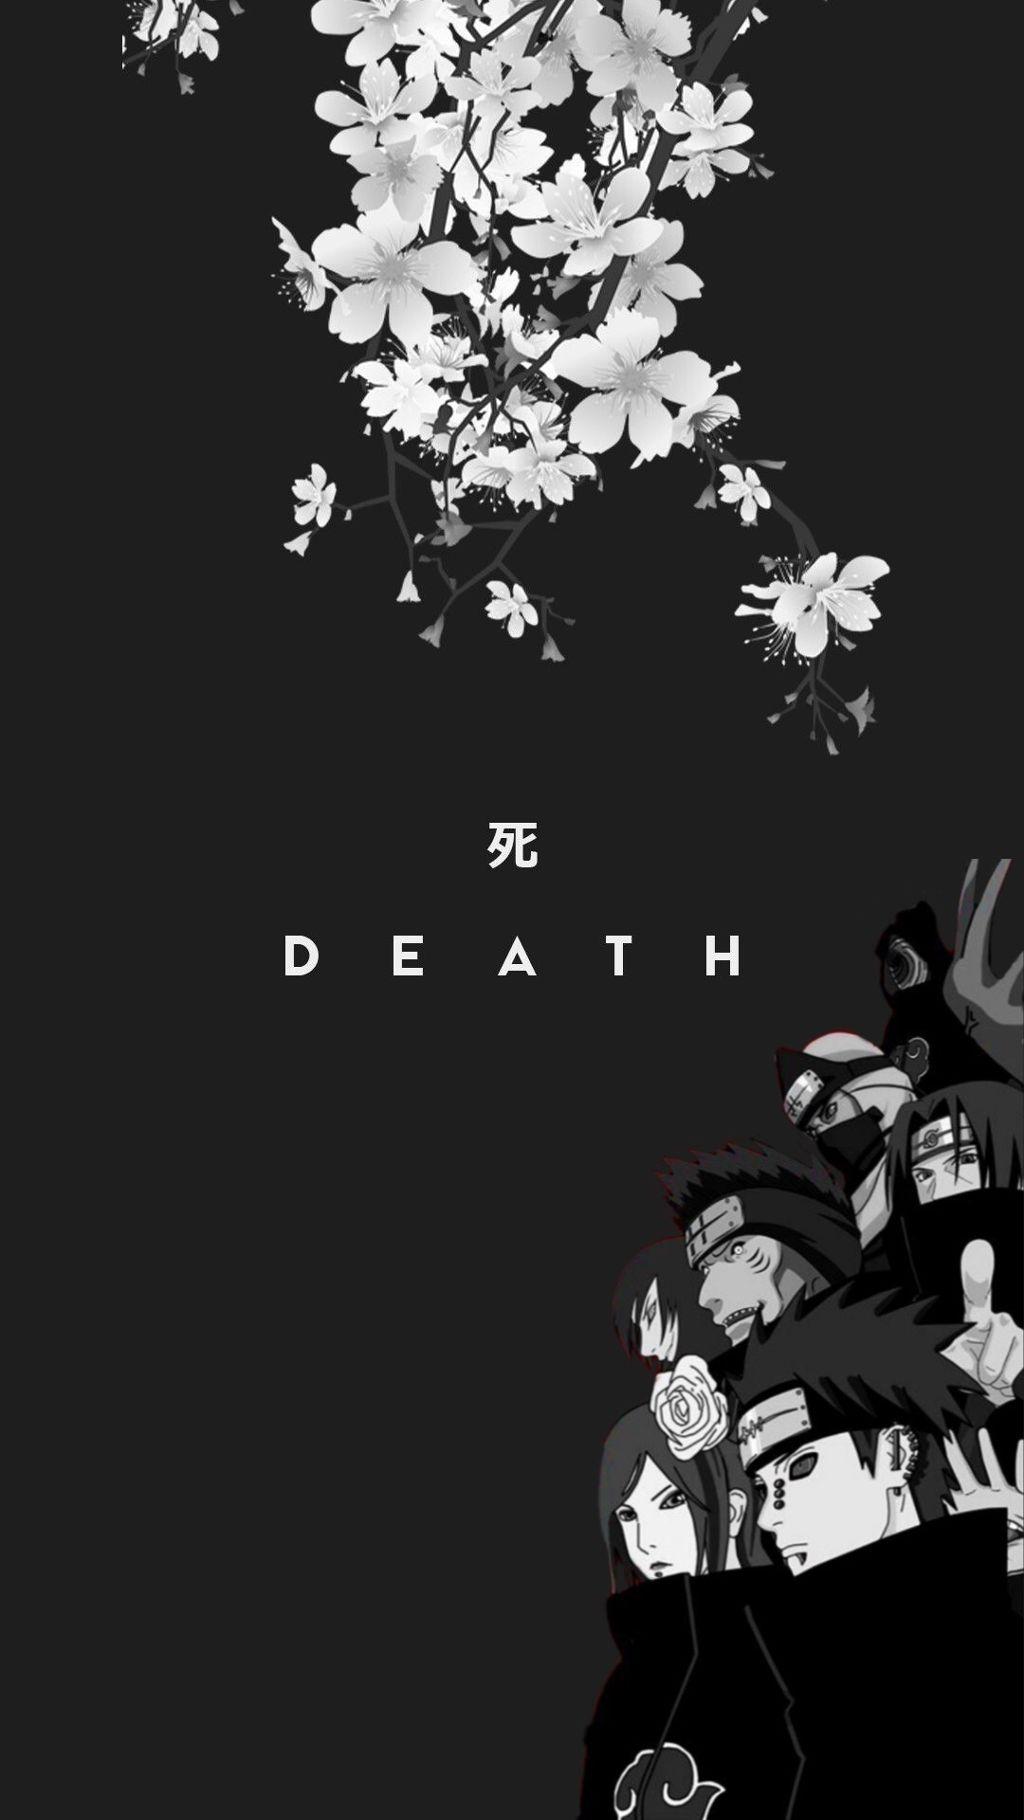 Black and white naruto wallpaper with death written in the middle - Naruto